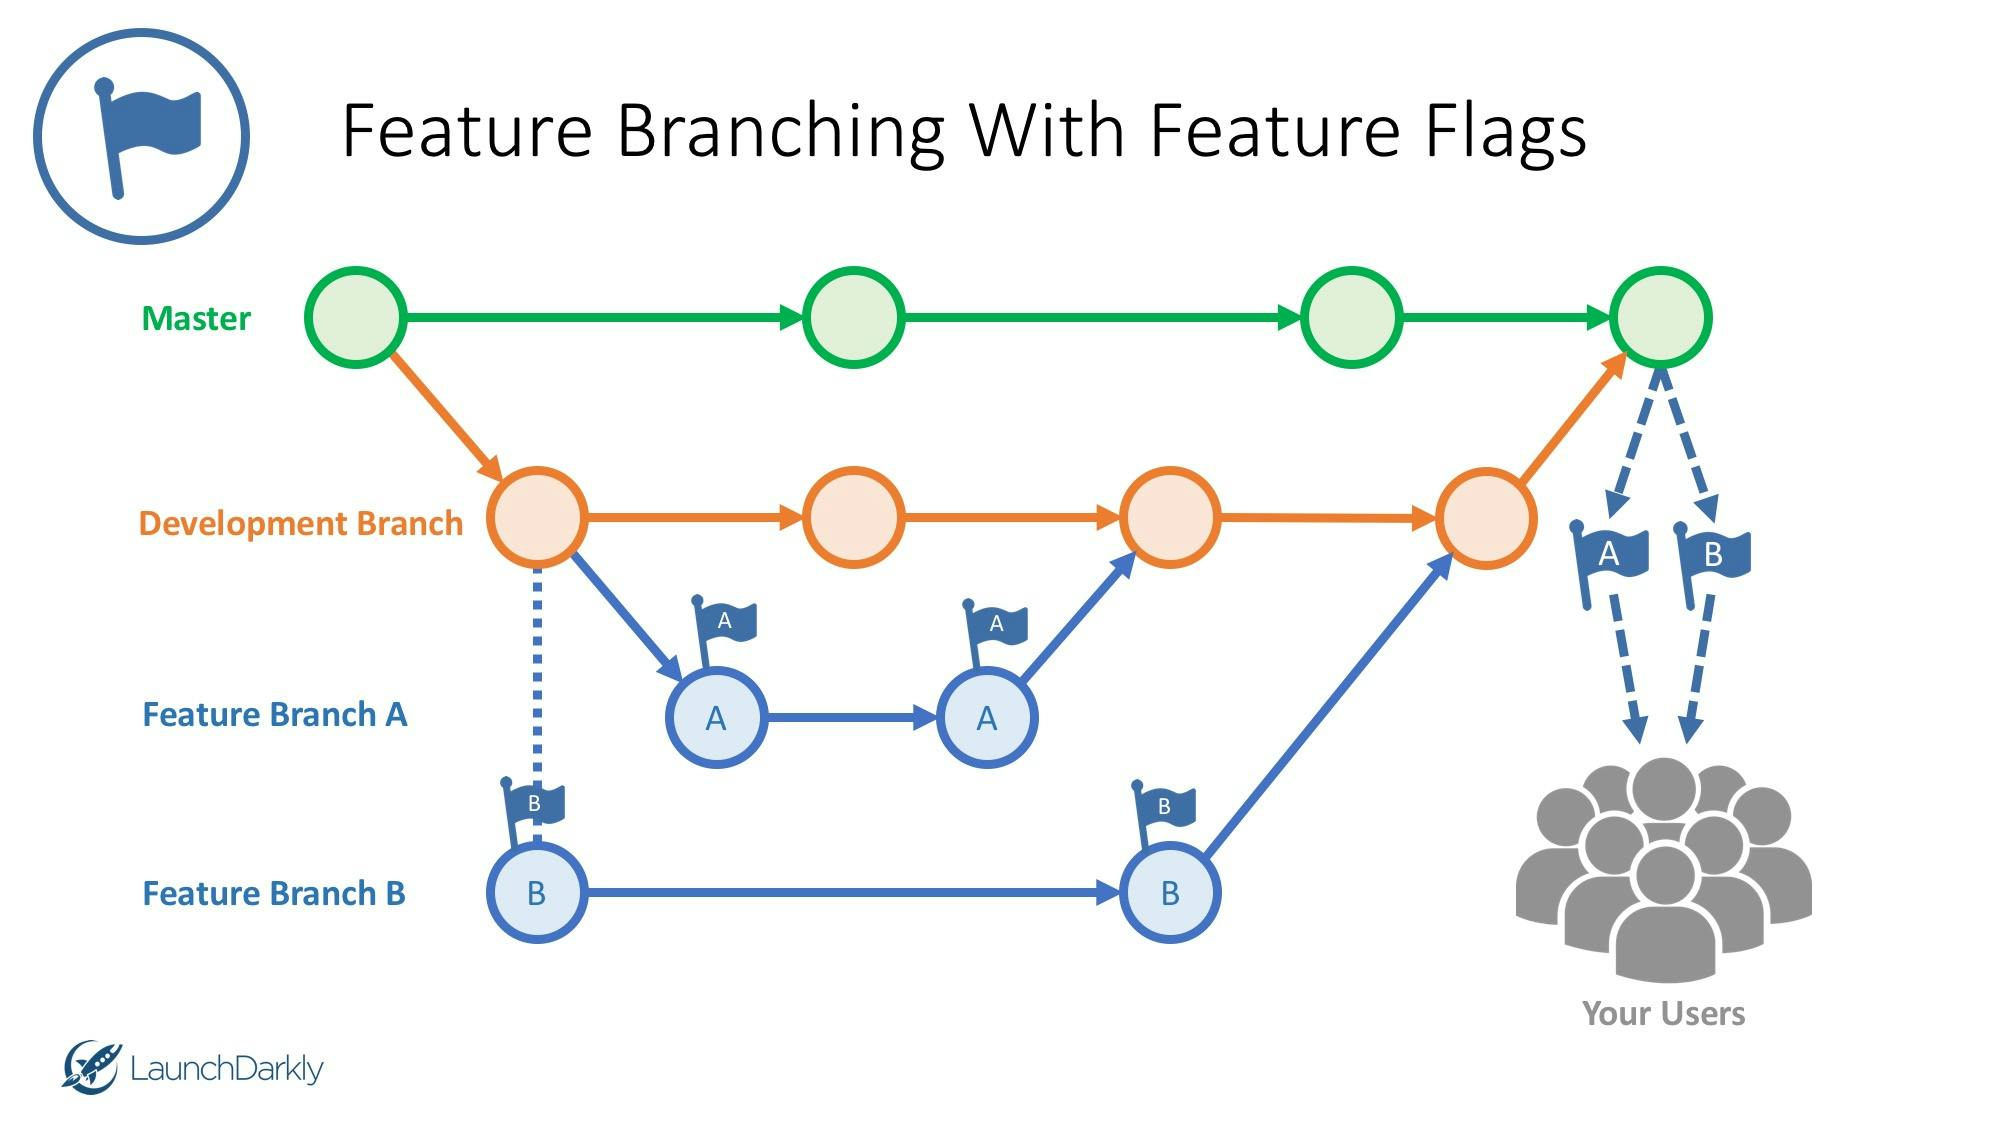 Feature branching with feature flags